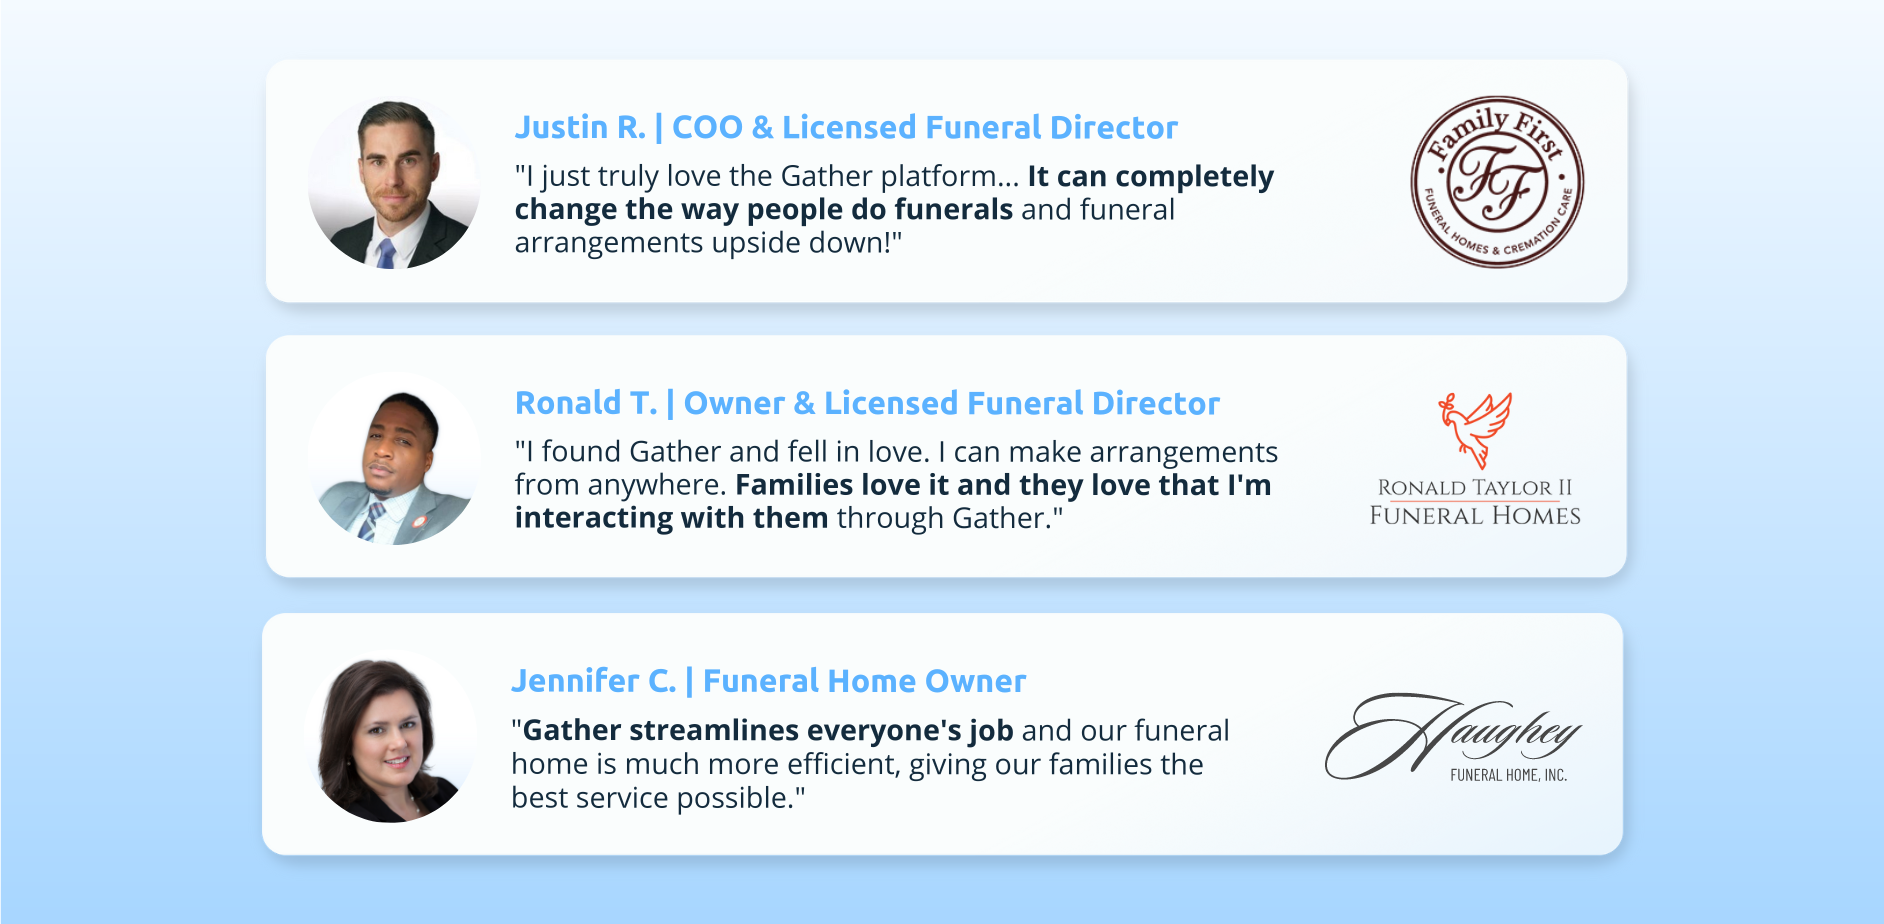 You should love your funeral home software. If you don't love using Gather, you can cancel in the next 60 days for any reasons and we will refund your entire onboarding fee.